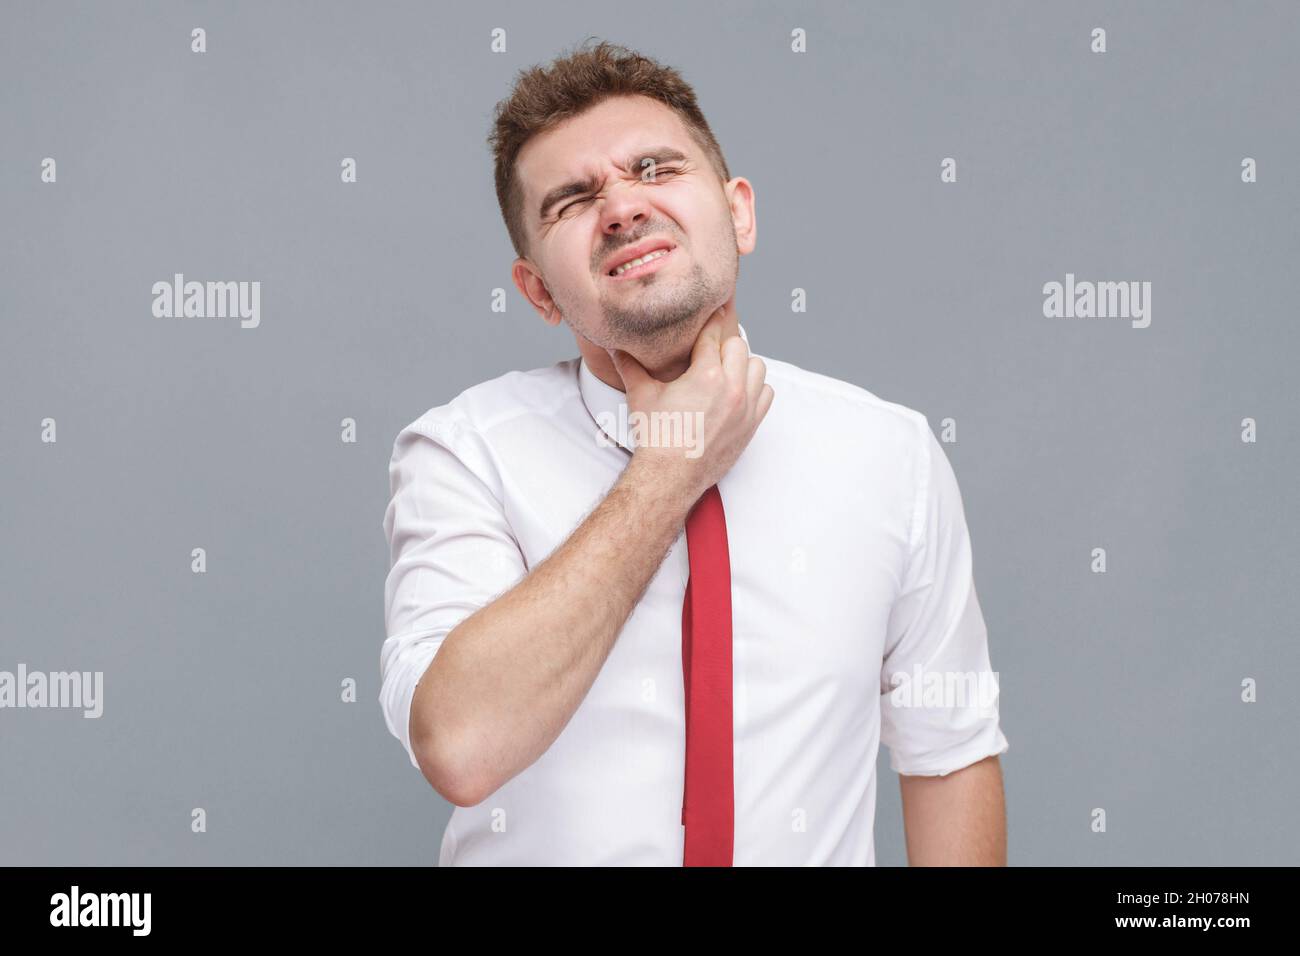 Throat pain. Portrait of young man in white shirt and tie standing and touching his painful neck. indoor isolated on gray background. Stock Photo